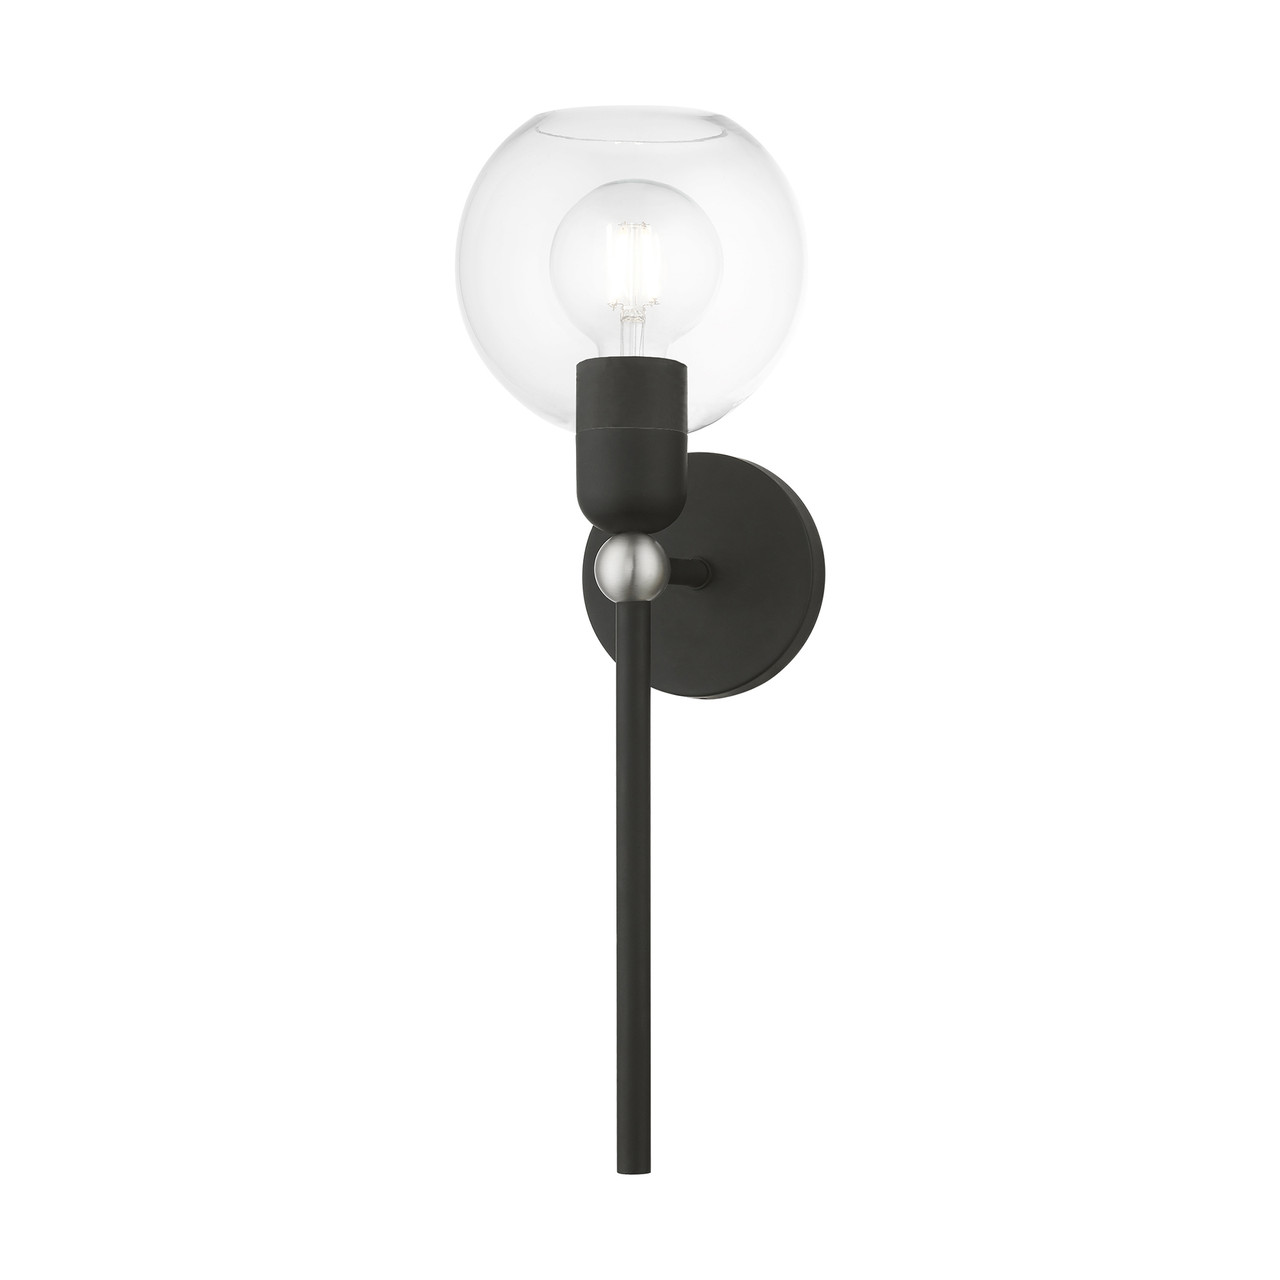 LIVEX LIGHTING 16971-04 1 Light Black with Brushed Nickel Accent Sphere Single Sconce